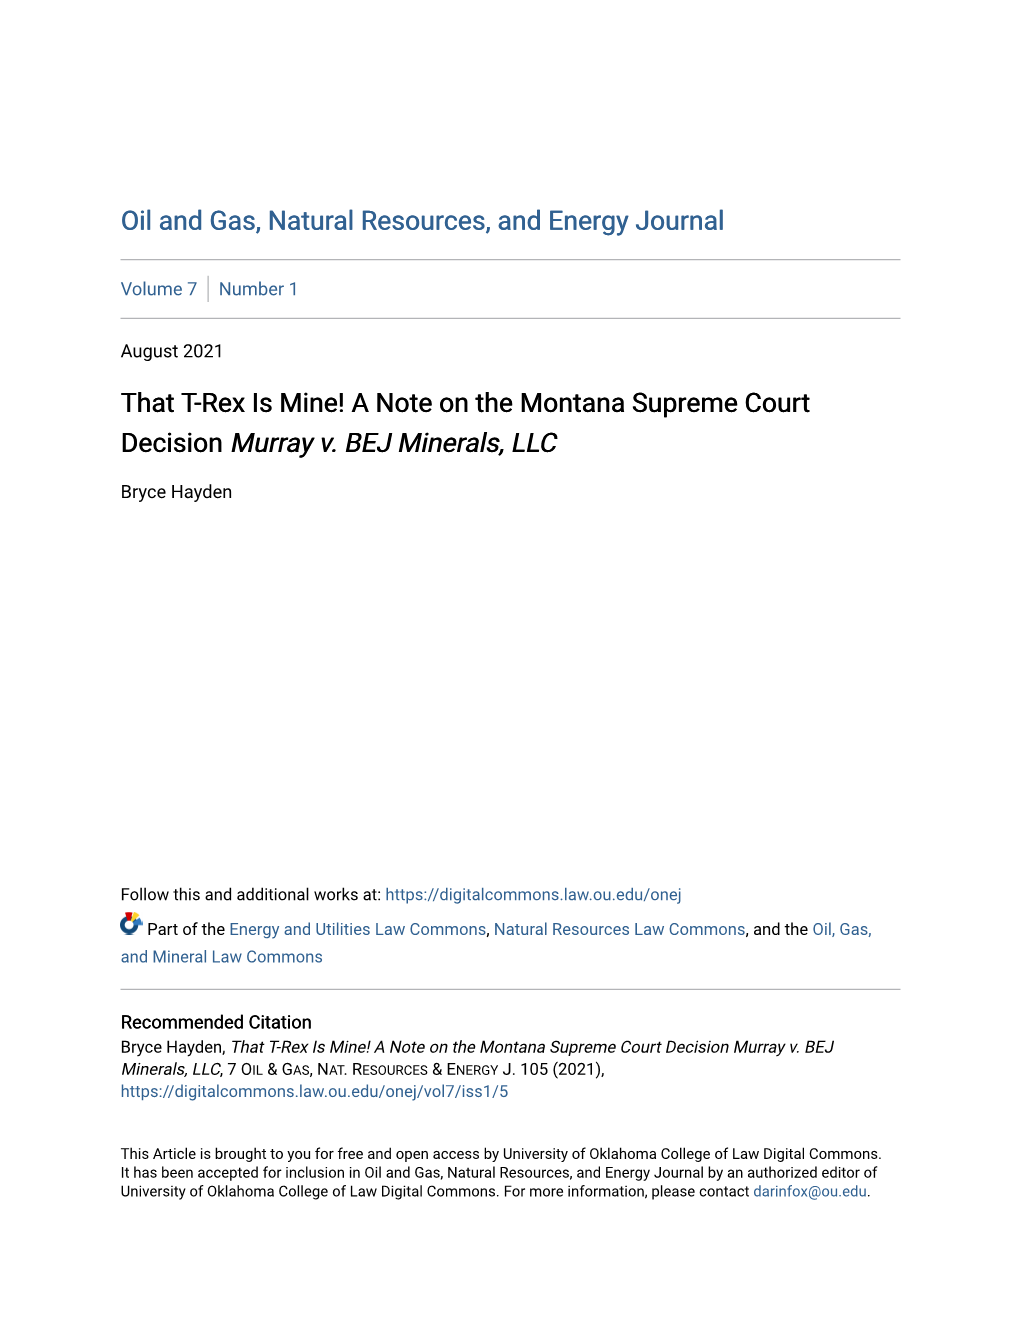 A Note on the Montana Supreme Court Decision Murray V. BEJ Minerals, LLC